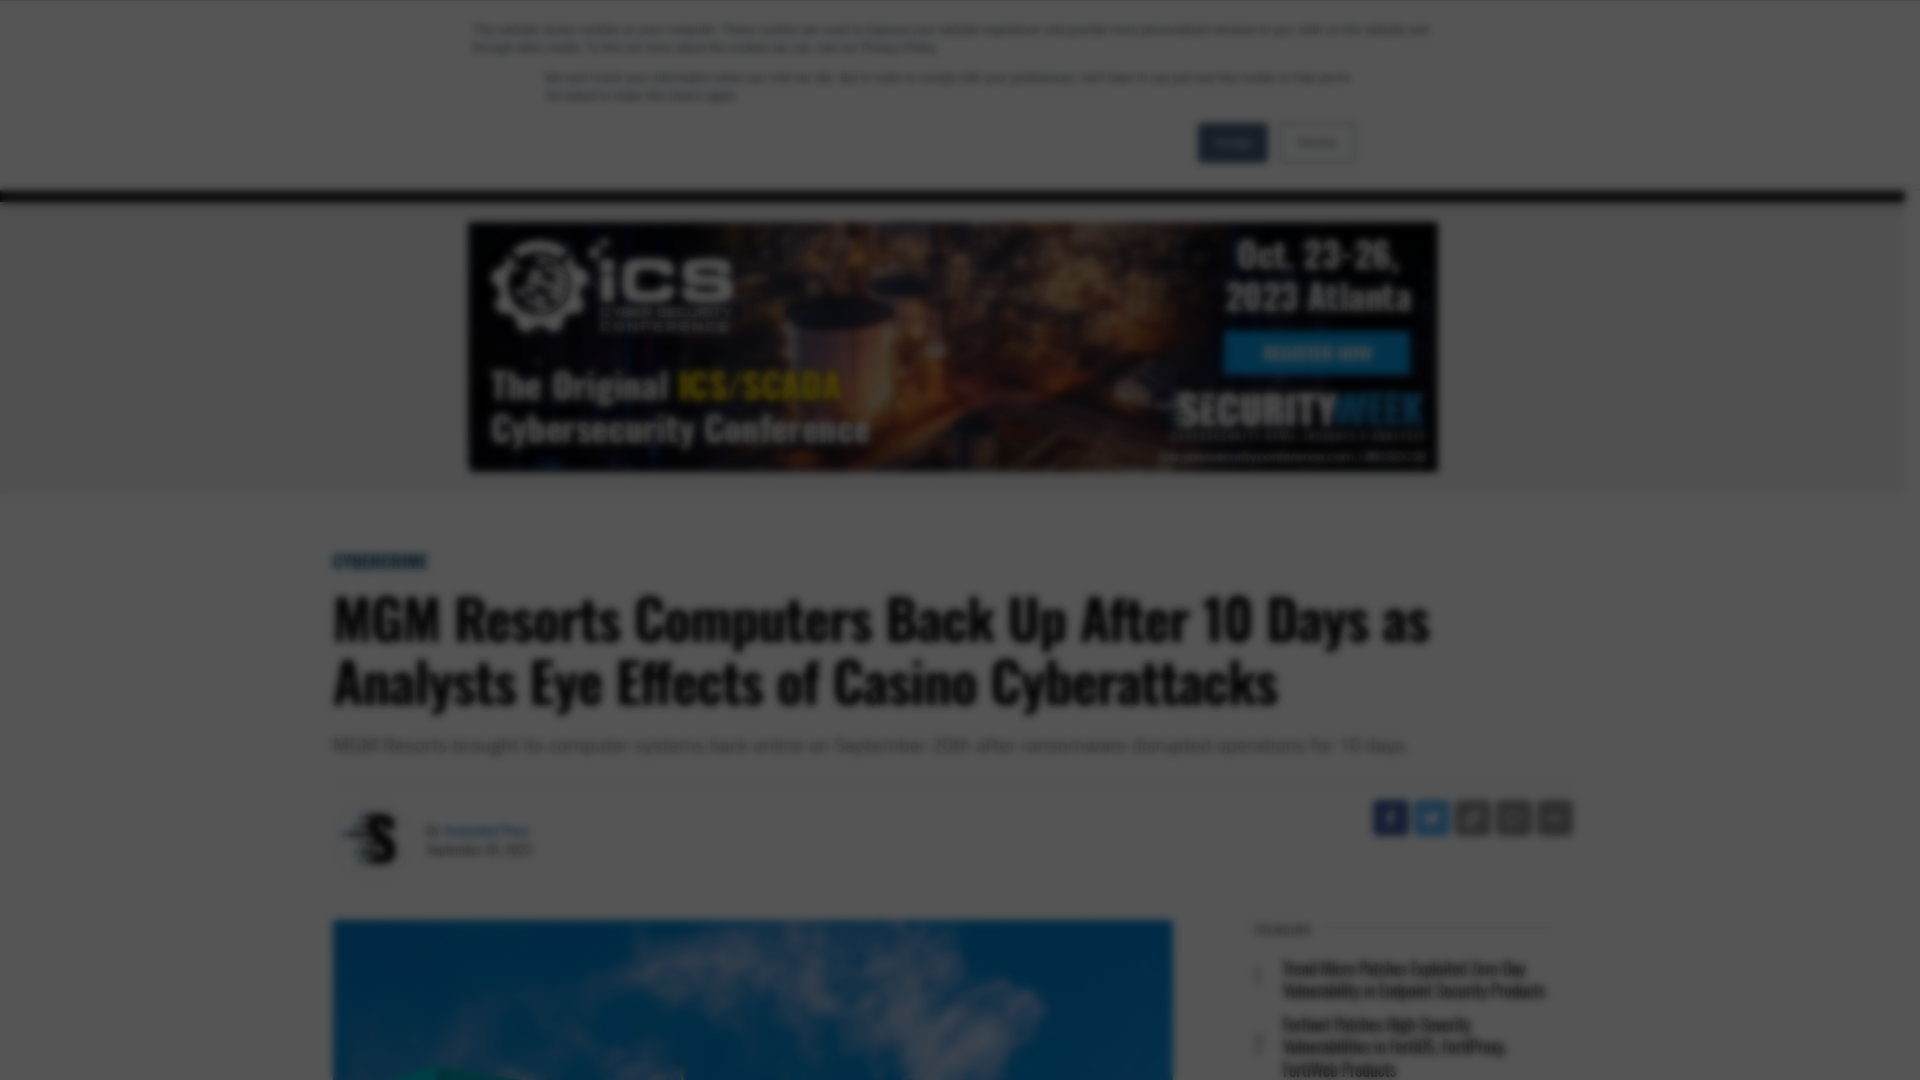 MGM Resorts Computers Back Up After 10 Days as Analysts Eye Effects of Casino Cyberattacks - SecurityWeek